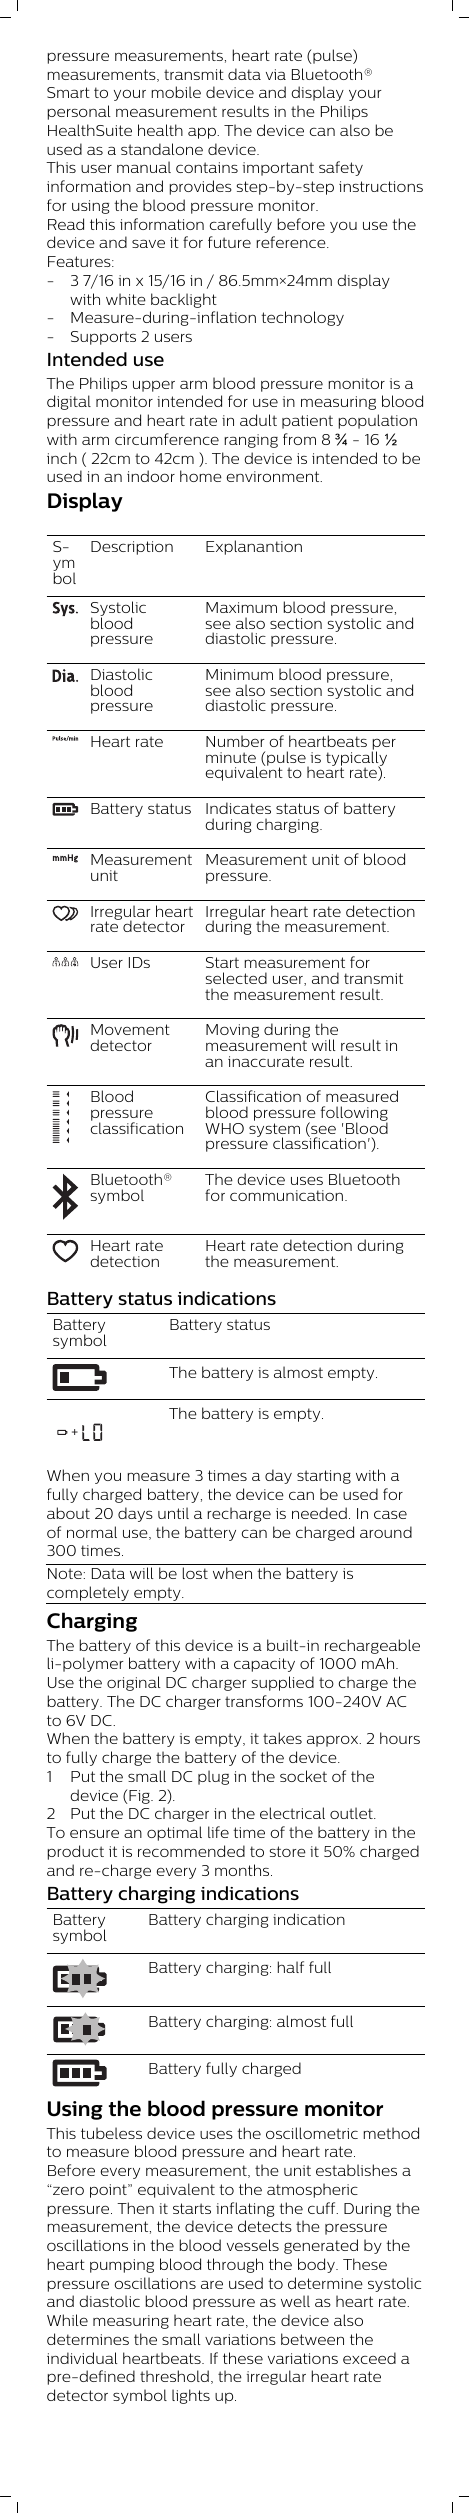 pressure measurements, heart rate (pulse)measurements, transmit data via Bluetooth®Smart to your mobile device and display yourpersonal measurement results in the PhilipsHealthSuite health app. The device can also beused as a standalone device.This user manual contains important safetyinformation and provides step-by-step instructionsfor using the blood pressure monitor.Read this information carefully before you use thedevice and save it for future reference.Features:- 3 7/16 in x 15/16 in / 86.5mm×24mm displaywith white backlight- Measure-during-inflation technology- Supports 2 usersIntended useThe Philips upper arm blood pressure monitor is adigital monitor intended for use in measuring bloodpressure and heart rate in adult patient populationwith arm circumference ranging from 8 ¾ - 16 ½inch ( 22cm to 42cm ). The device is intended to beused in an indoor home environment. Display SymbolDescription ExplanantionSystolicbloodpressureMaximum blood pressure,see also section systolic anddiastolic pressure.DiastolicbloodpressureMinimum blood pressure,see also section systolic anddiastolic pressure.Heart rate Number of heartbeats perminute (pulse is typicallyequivalent to heart rate).Battery status Indicates status of batteryduring charging.MeasurementunitMeasurement unit of bloodpressure.Irregular heartrate detectorIrregular heart rate detectionduring the measurement.User IDs Start measurement forselected user, and transmitthe measurement result.MovementdetectorMoving during themeasurement will result inan inaccurate result.BloodpressureclassificationClassification of measuredblood pressure followingWHO system (see &apos;Bloodpressure classification&apos;).Bluetooth®symbolThe device uses Bluetoothfor communication.Heart ratedetectionHeart rate detection duringthe measurement.Battery status indicationsBatterysymbolBattery statusThe battery is almost empty.+The battery is empty.When you measure 3 times a day starting with afully charged battery, the device can be used forabout 20 days until a recharge is needed. In caseof normal use, the battery can be charged around300 times.Note: Data will be lost when the battery iscompletely empty. ChargingThe battery of this device is a built-in rechargeableli-polymer battery with a capacity of 1000 mAh.Use the original DC charger supplied to charge thebattery. The DC charger transforms 100-240V ACto 6V DC.When the battery is empty, it takes approx. 2 hoursto fully charge the battery of the device.1 Put the small DC plug in the socket of thedevice (Fig. 2).2 Put the DC charger in the electrical outlet.To ensure an optimal life time of the battery in theproduct it is recommended to store it 50% chargedand re-charge every 3 months.Battery charging indicationsBatterysymbolBattery charging indicationBattery charging: half fullBattery charging: almost fullBattery fully chargedUsing the blood pressure monitorThis tubeless device uses the oscillometric methodto measure blood pressure and heart rate. Before every measurement, the unit establishes a“zero point” equivalent to the atmosphericpressure. Then it starts inflating the cuff. During themeasurement, the device detects the pressureoscillations in the blood vessels generated by theheart pumping blood through the body. Thesepressure oscillations are used to determine systolicand diastolic blood pressure as well as heart rate.While measuring heart rate, the device alsodetermines the small variations between theindividual heartbeats. If these variations exceed apre-defined threshold, the irregular heart ratedetector symbol lights up.